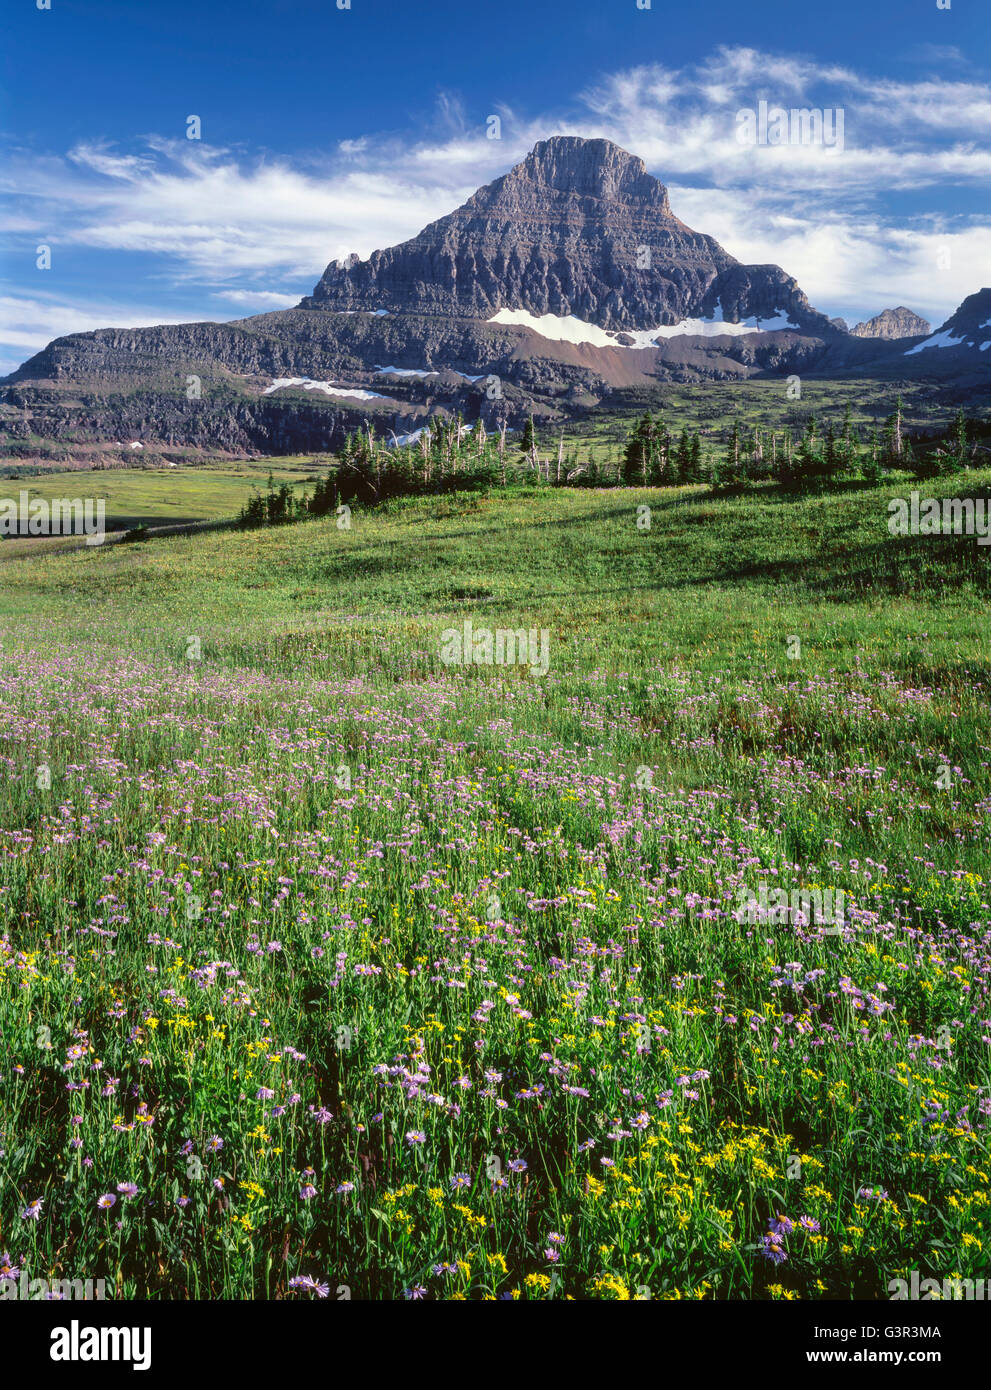 USA, Montana, Glacier National Park, Reynolds Mountain rises beyond wind-stunted conifers and meadow of fleabane and arnica. Stock Photo